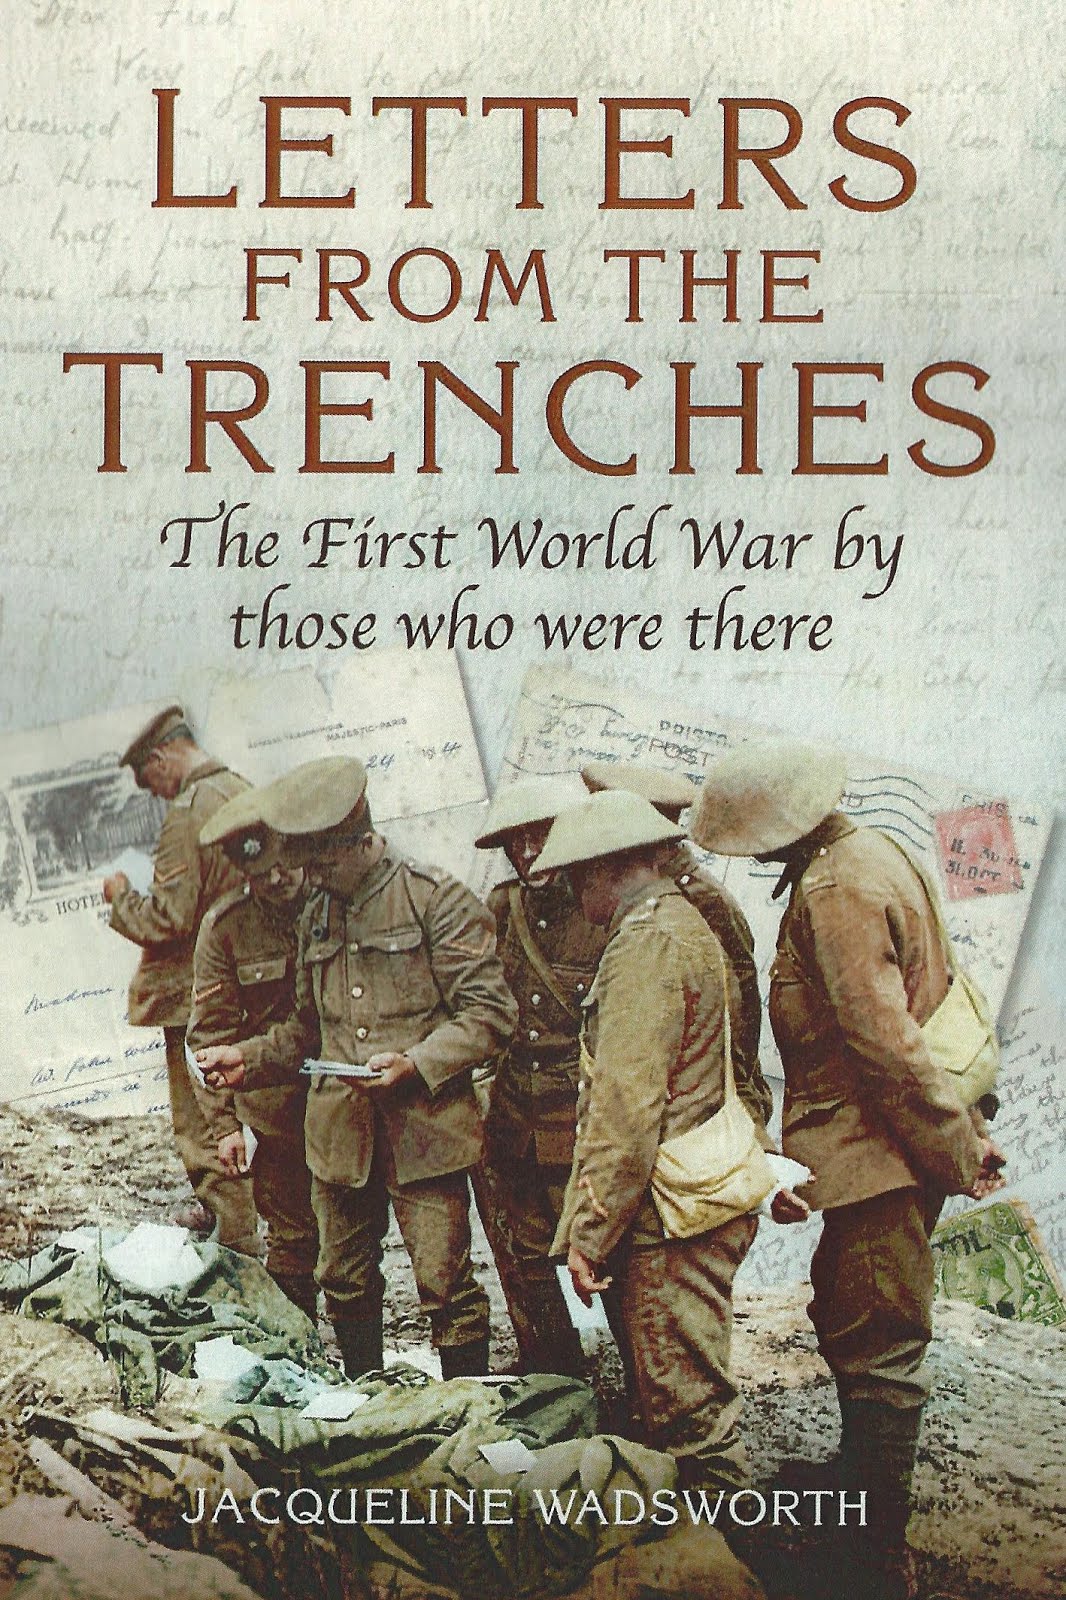 How to write a letter from the trenches